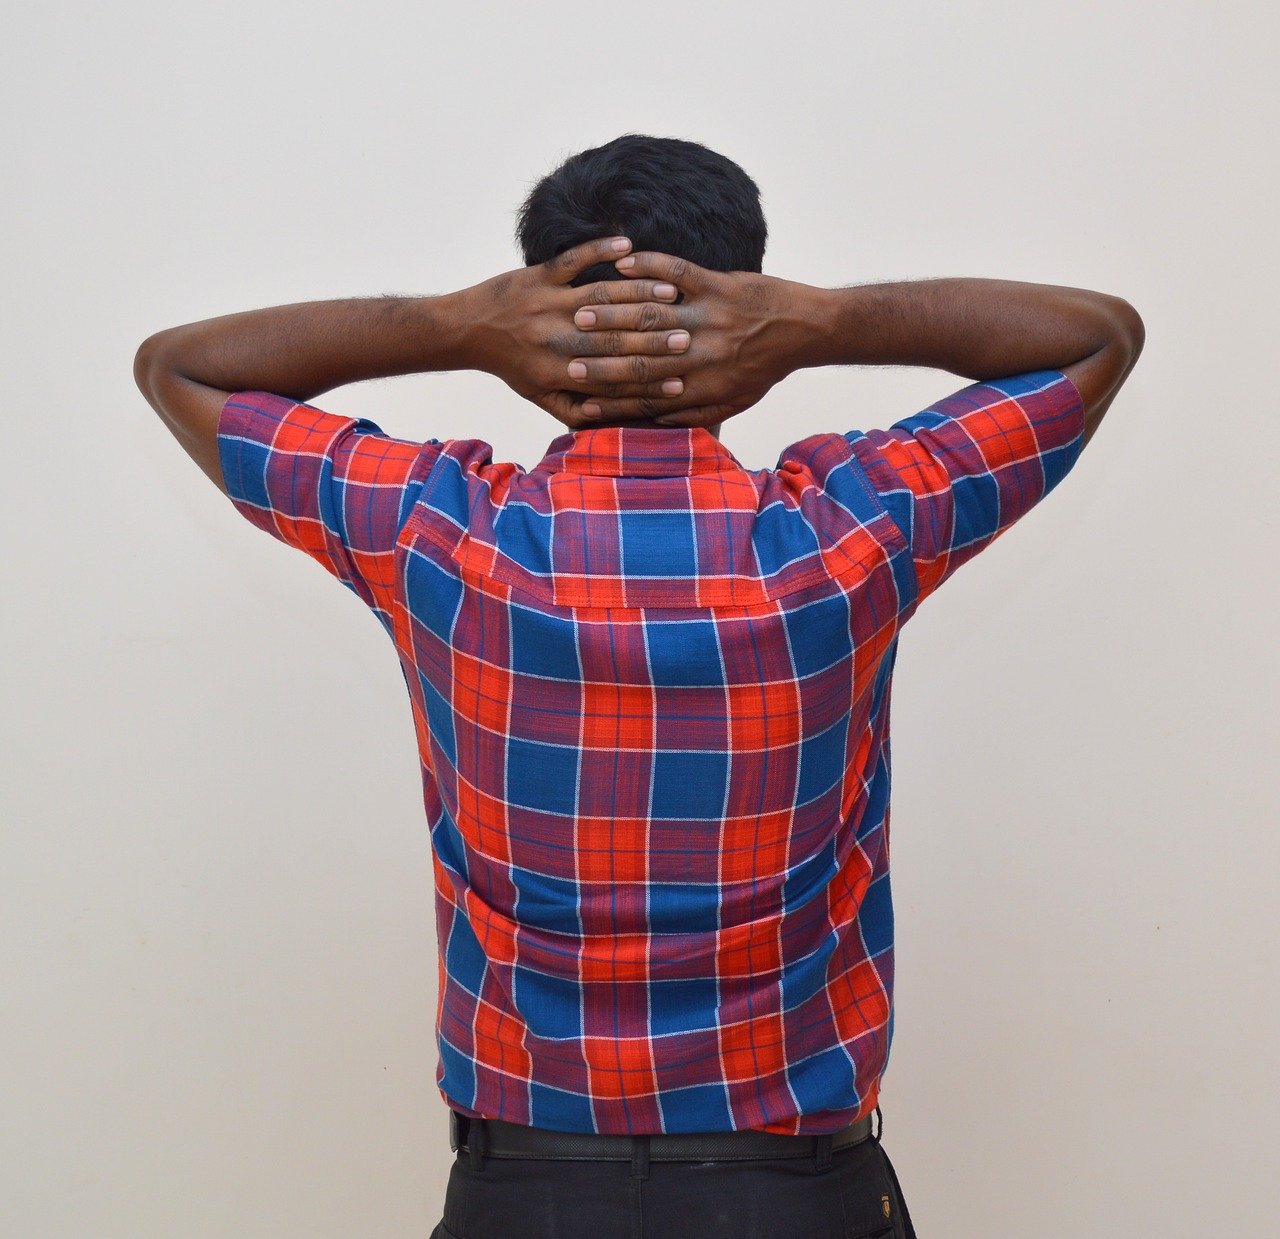 Image of a stressed out man with his crossed arms behind his head.